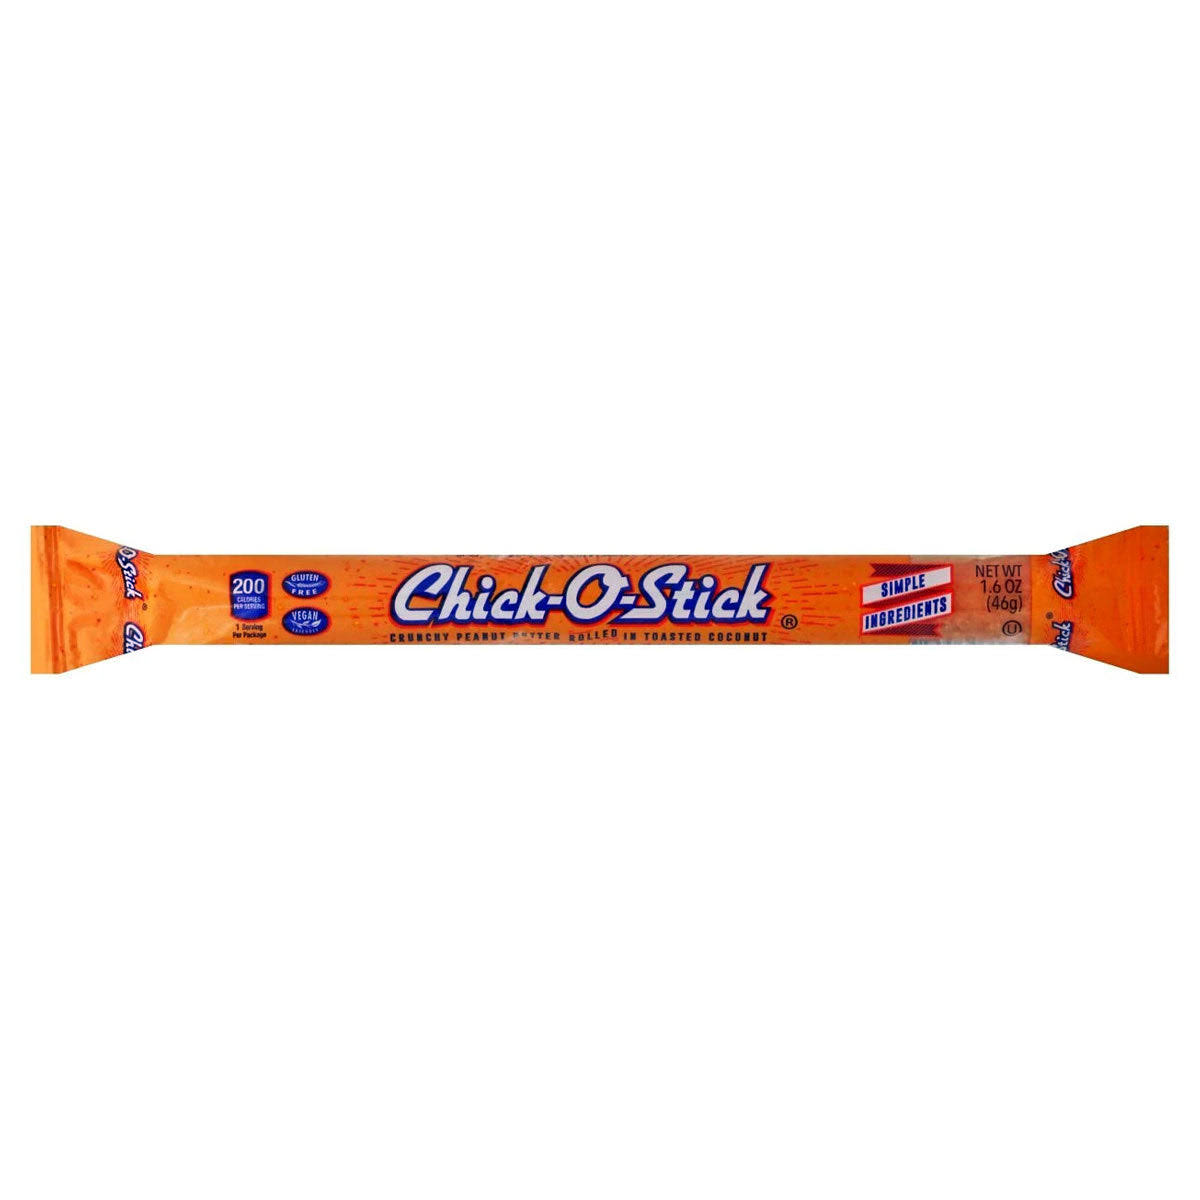 Chick O Stick Crunchy Peanut Butter Rolled, in Toasted Coconut - 1.6 oz